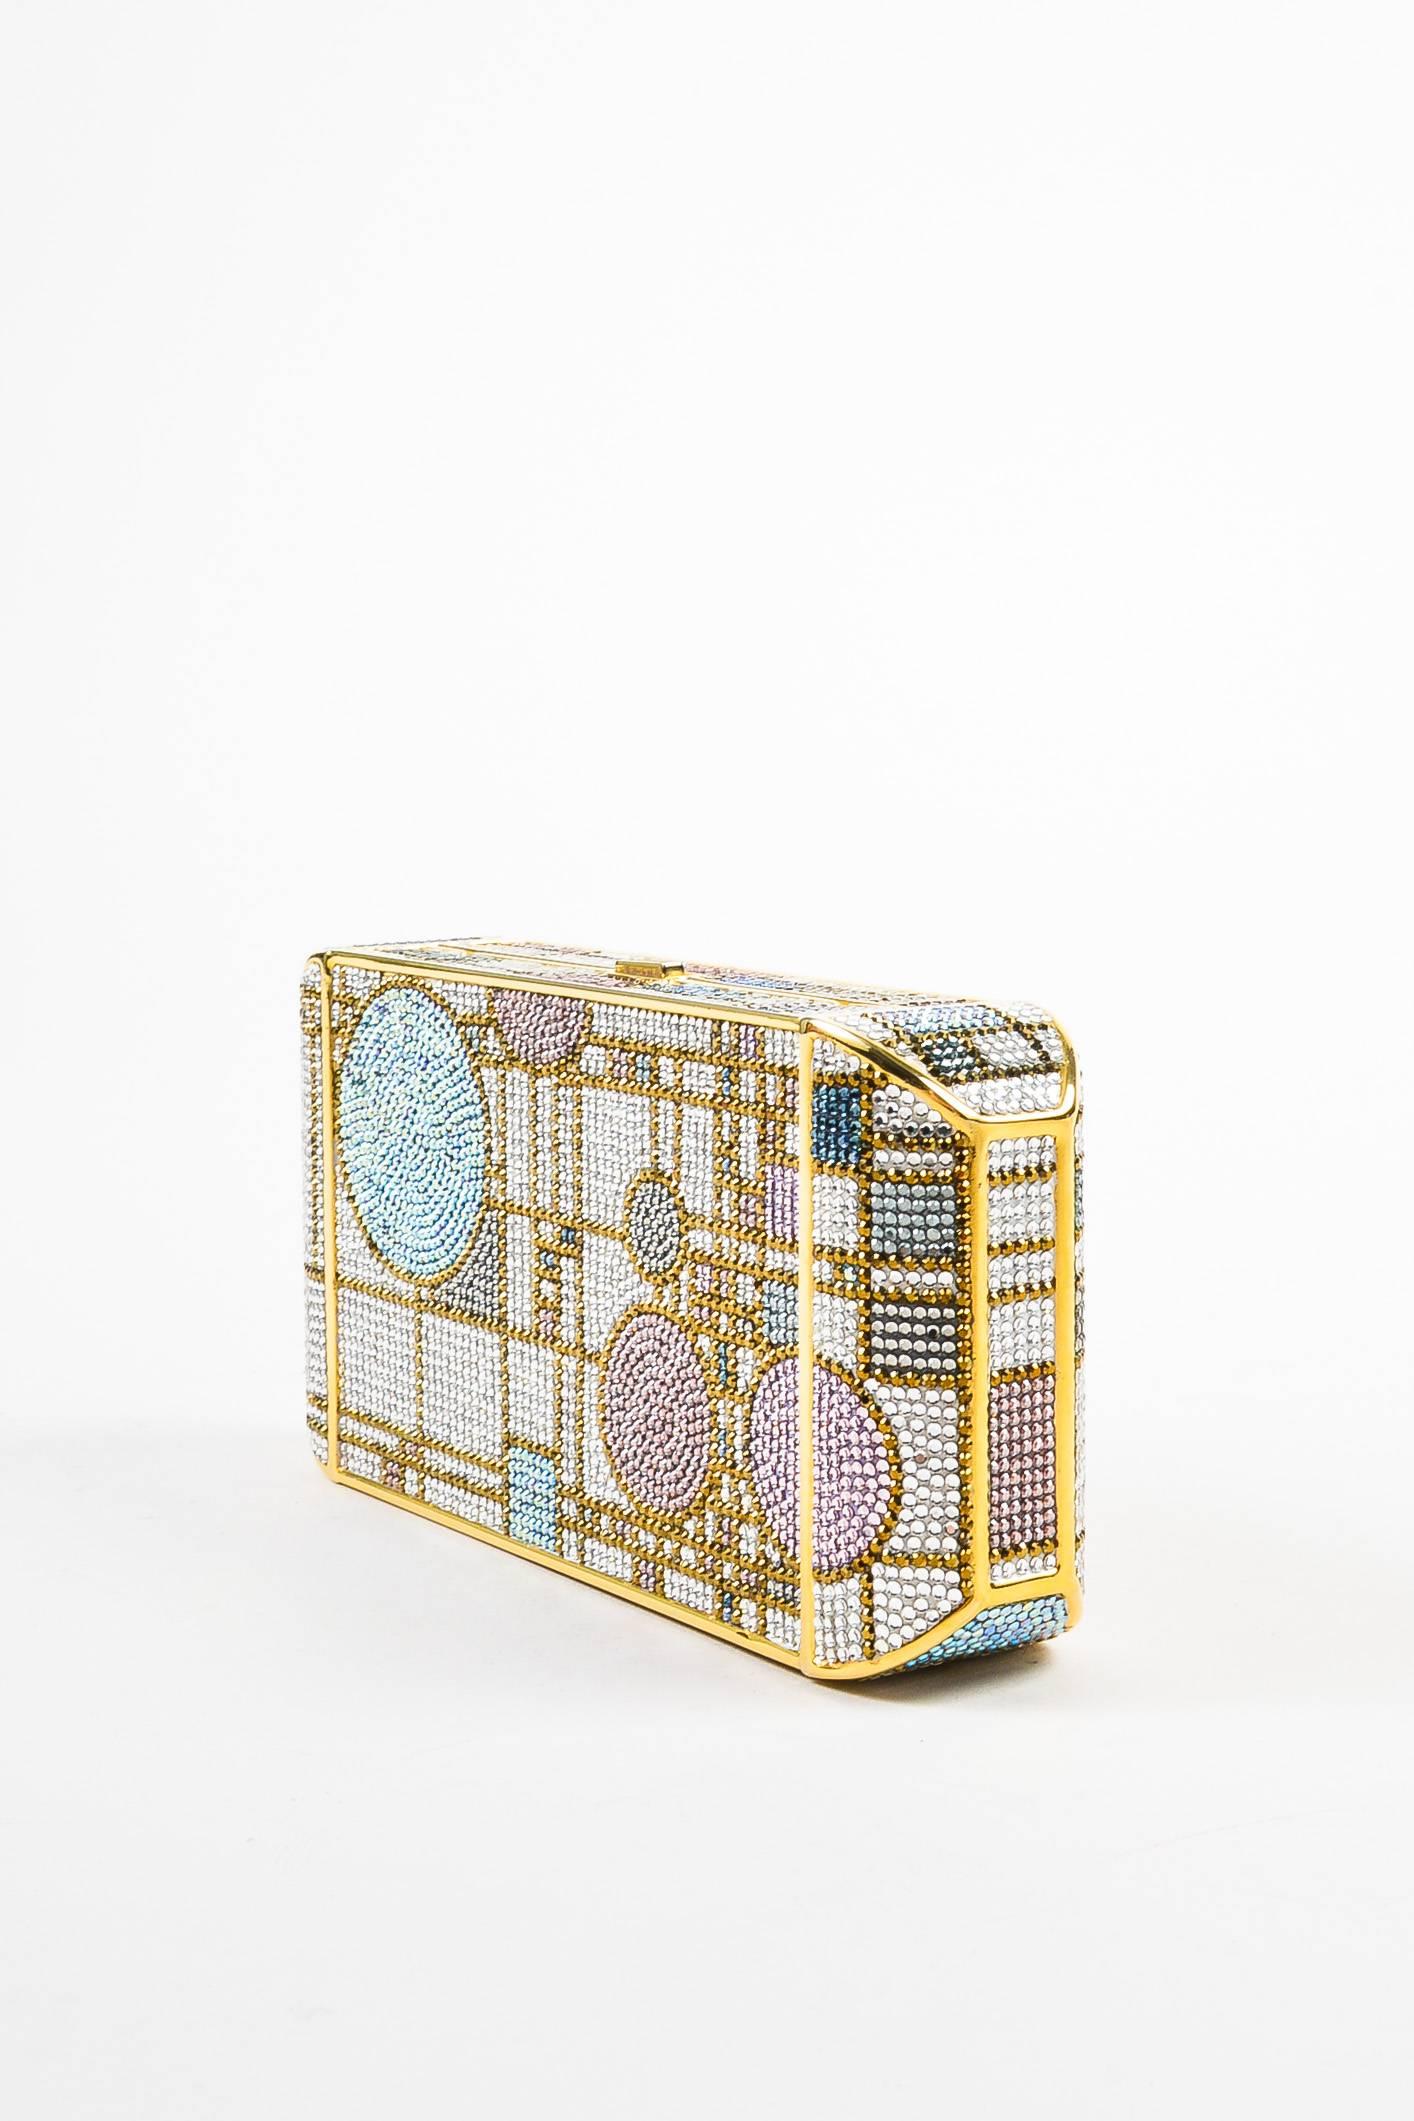 Elevate your evening look with this show-stopping minaudiere clutch bag detailed with a hardshell body, Swarovski crystals in a geometric pattern, snake chain shoulder strap, and a dainty crystal embellished push-lock closure. Comes with a cosmetic